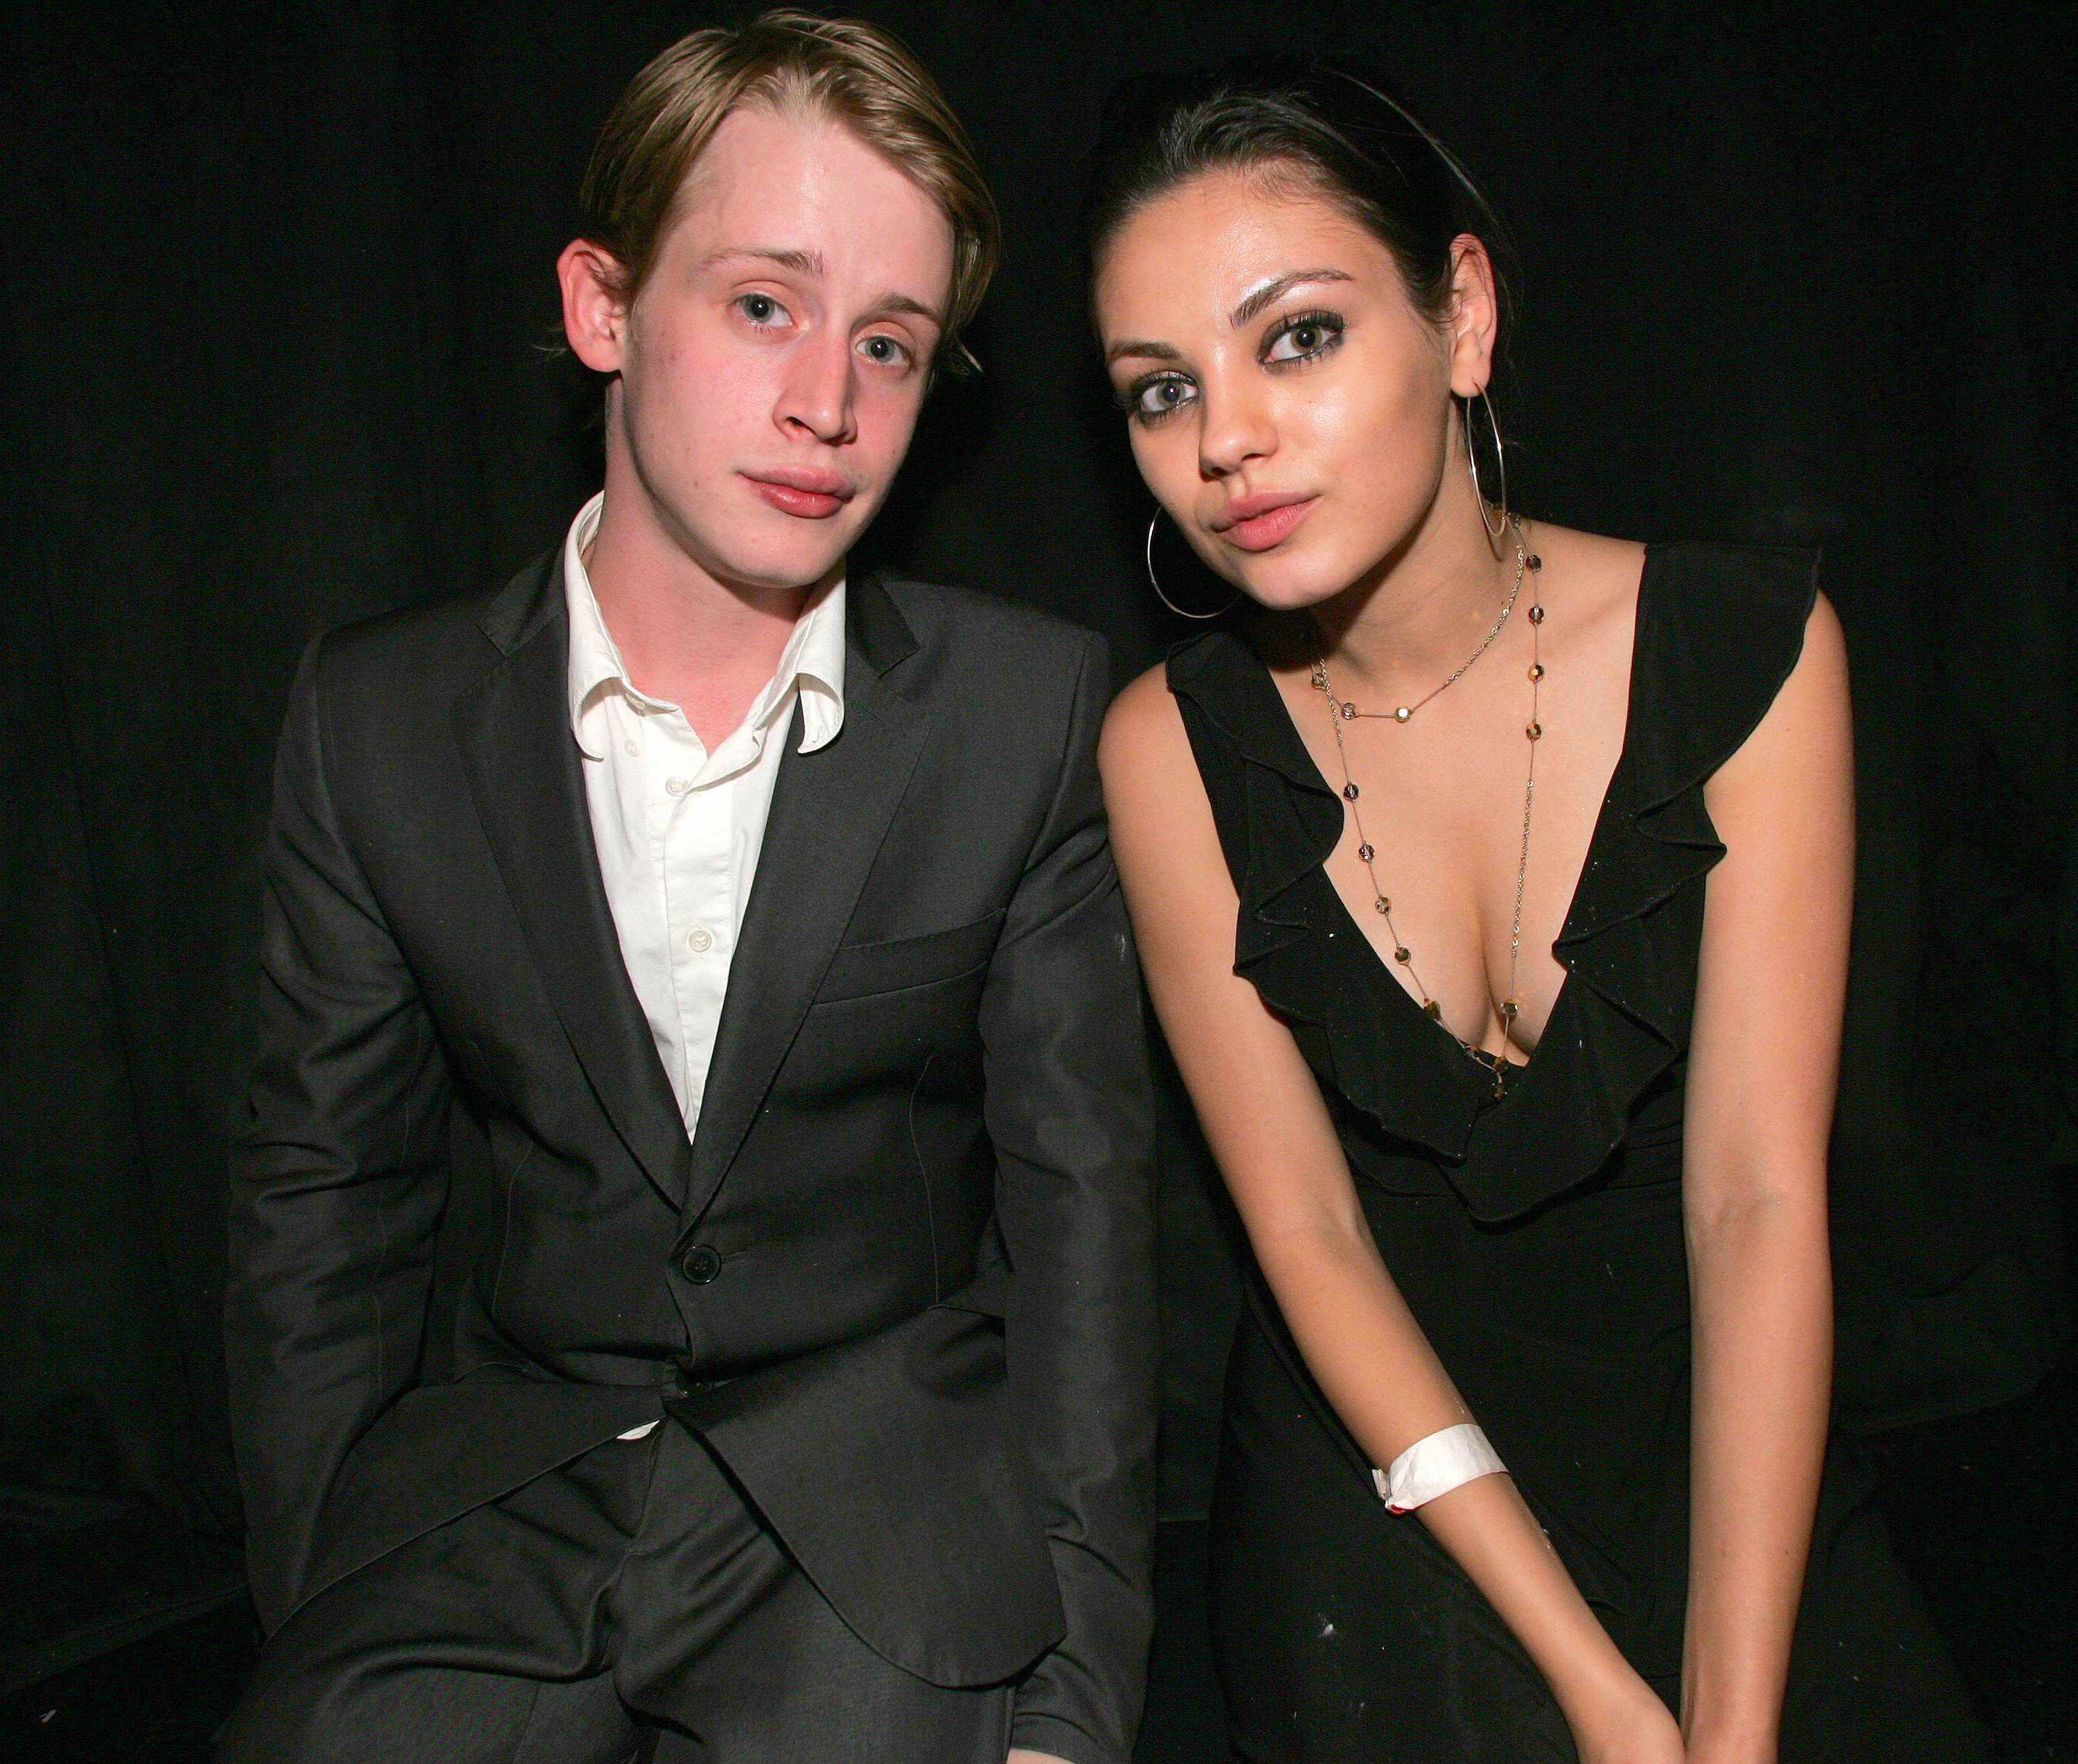 Macaulay Culkin and Mila Kunis sitting next to each at an event